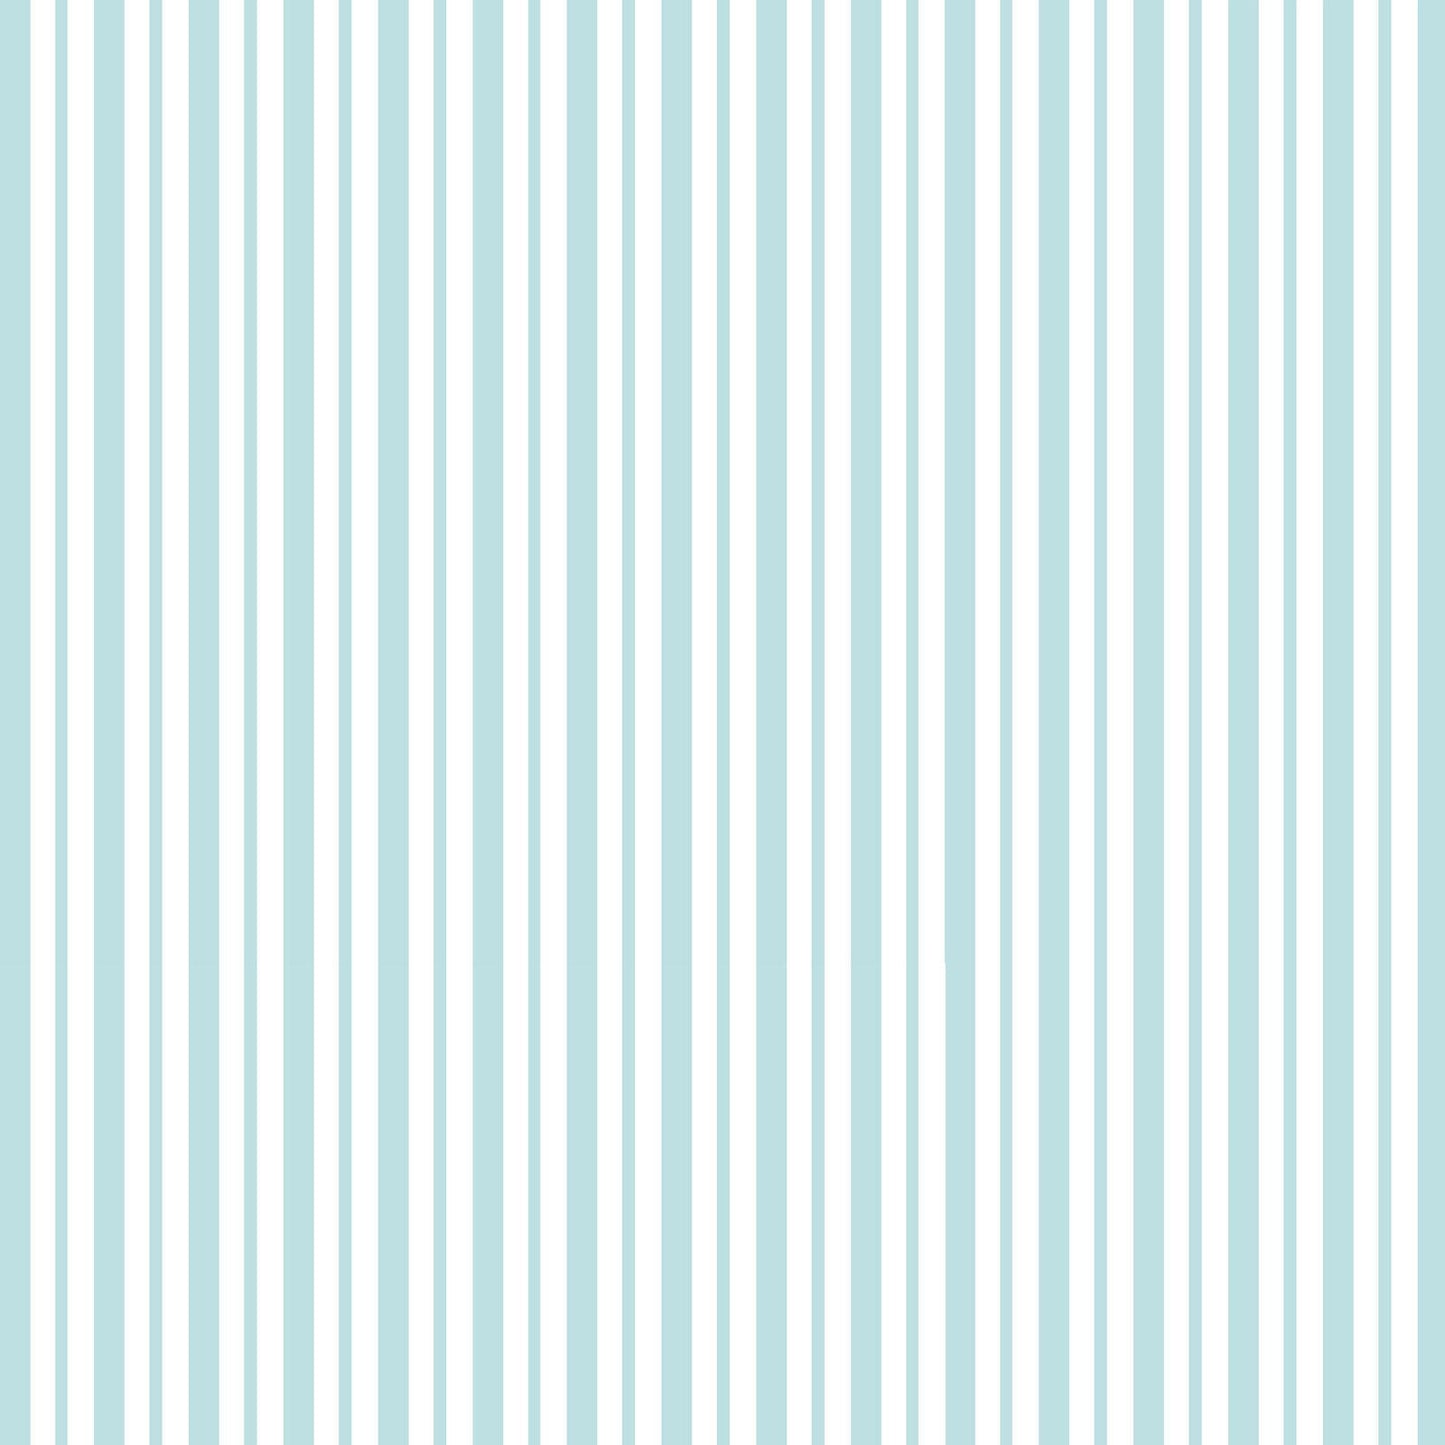 Mini Awning Stripe in aqua (MAS8249-Q) is part of the Kimberbell Basics line designed by Kim Christopherson for Maywood Studio. This fabric features aqua/teal stripes in two sizes on a white background, and adds a soft aqua texture to projects.